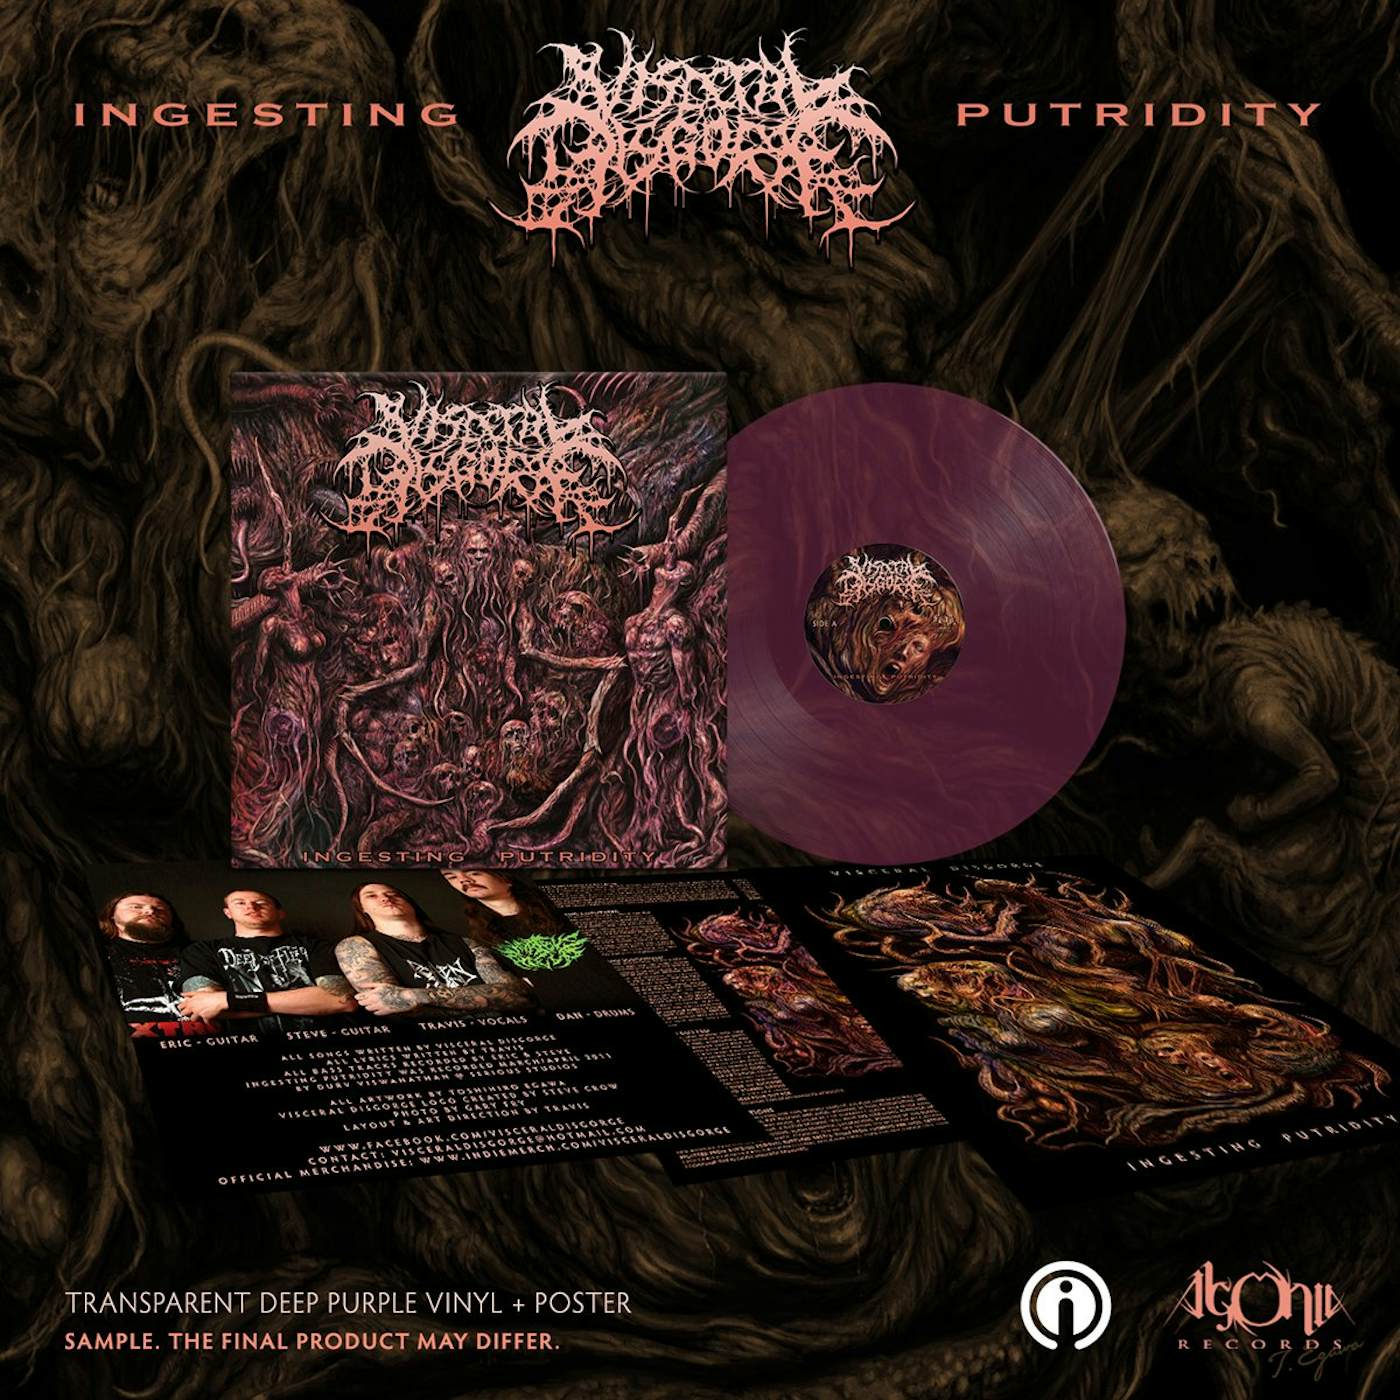 Visceral Disgorge "Ingesting Putridity (Purple)" Limited Edition 12"